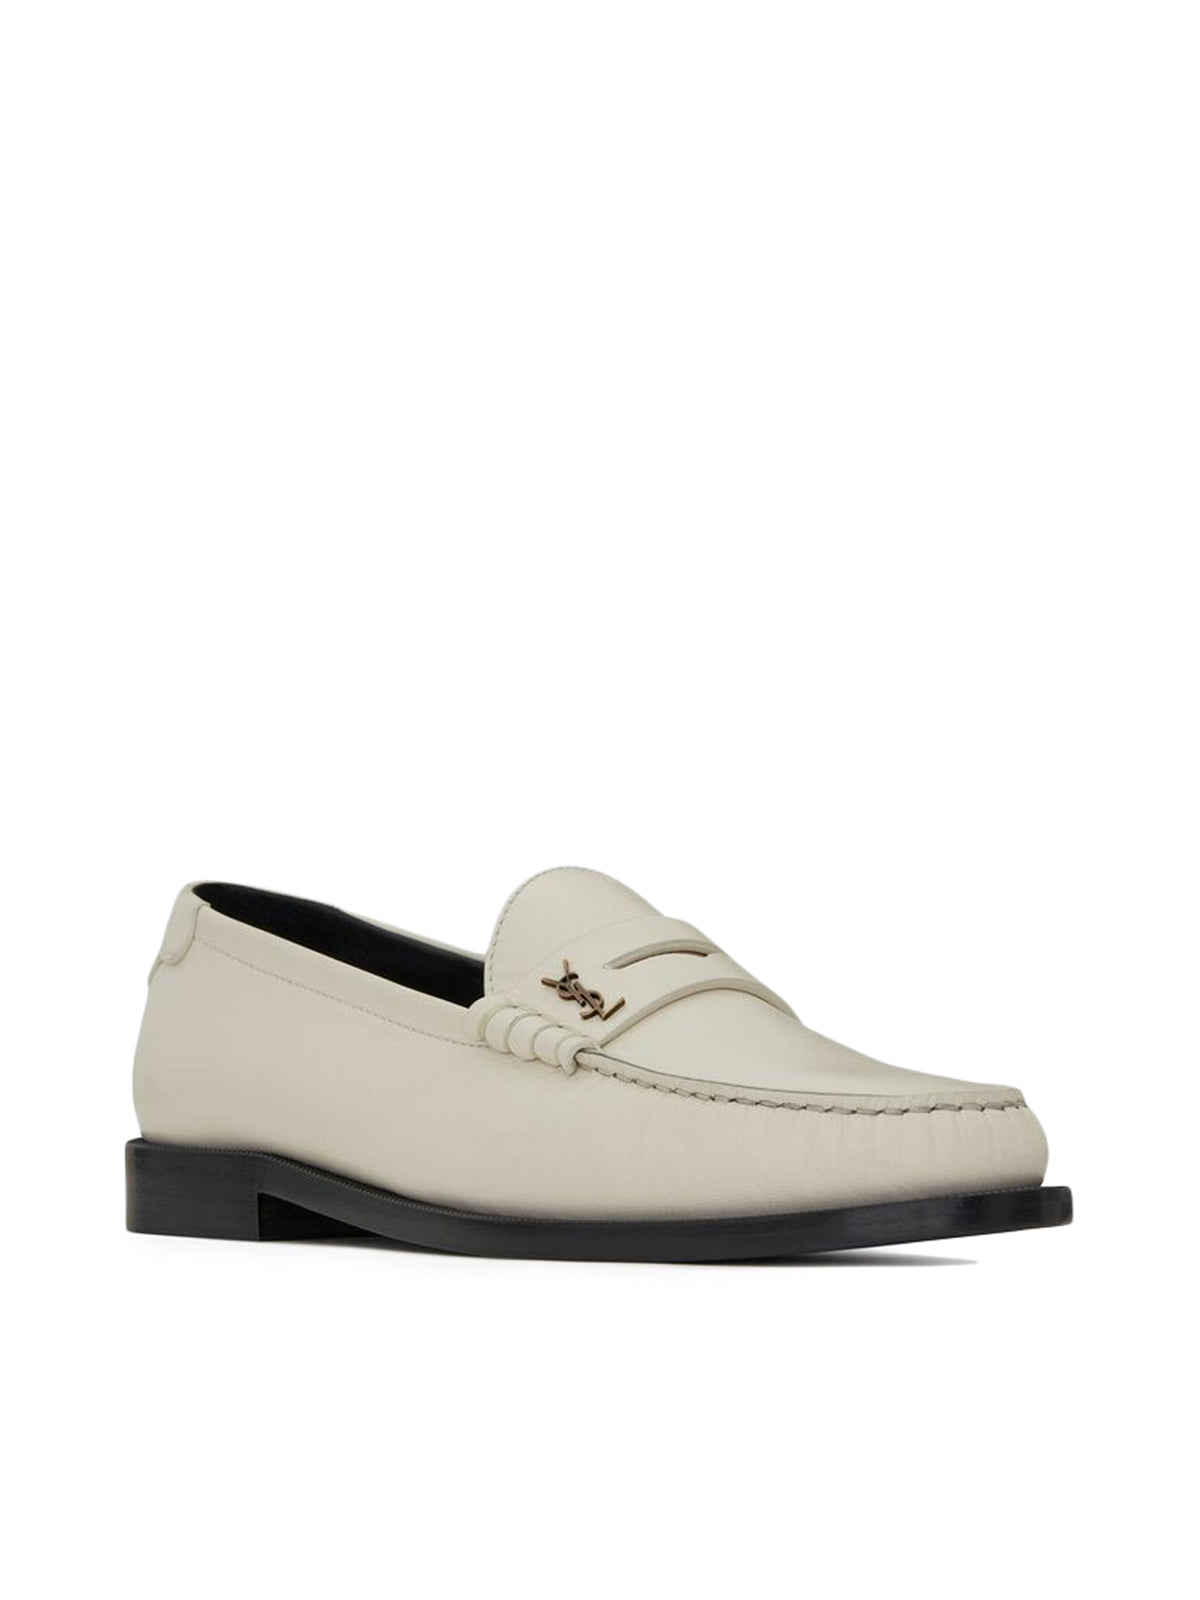 MONOGRAM LOAFERS IN SMOOTH LEATHER